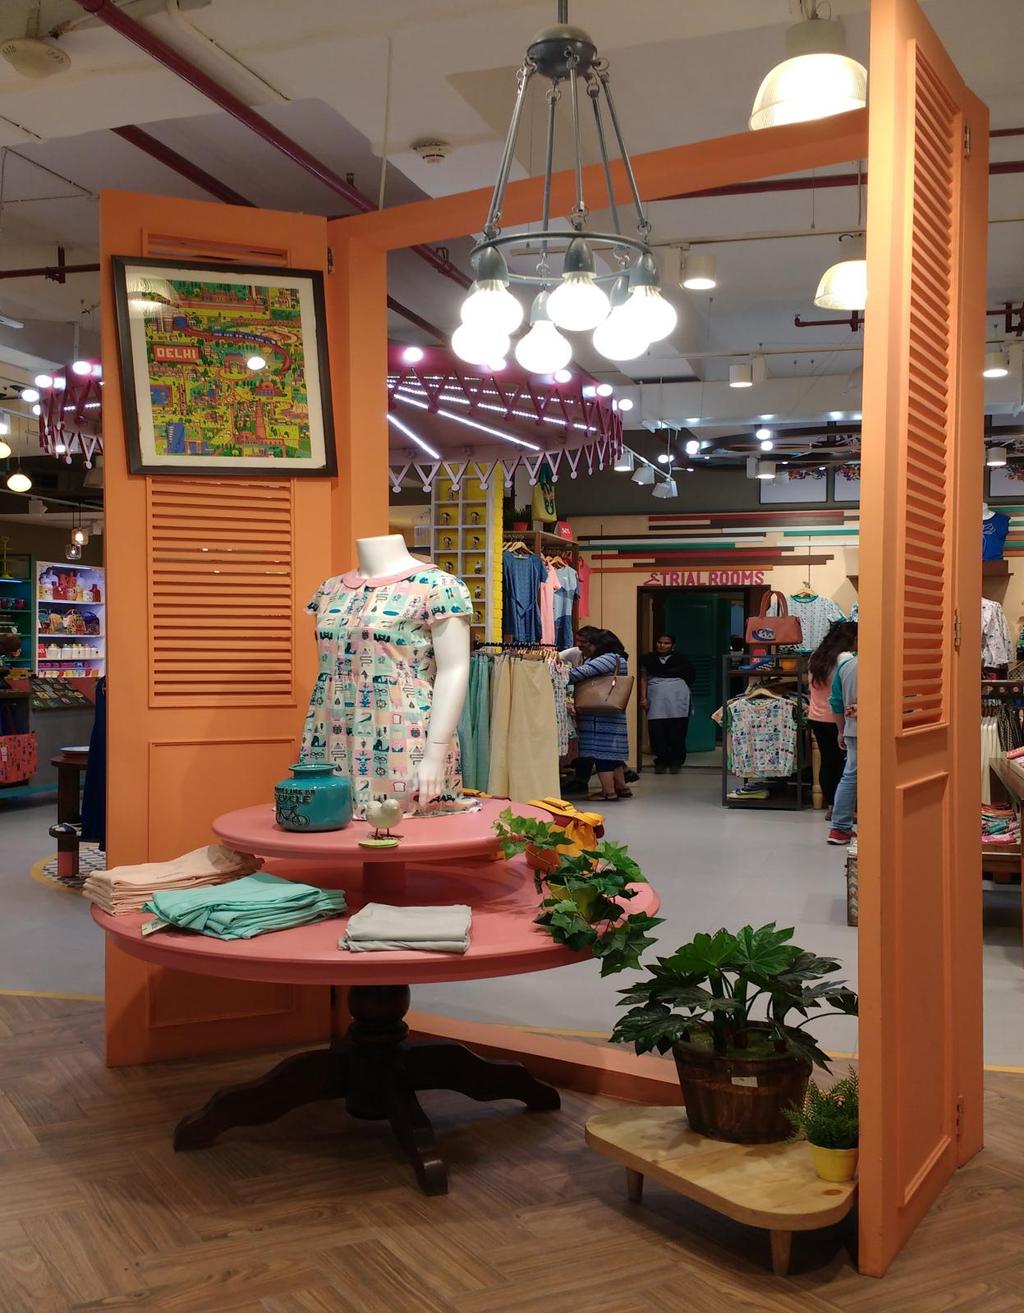 IMAGES OF VARIOUS STORE